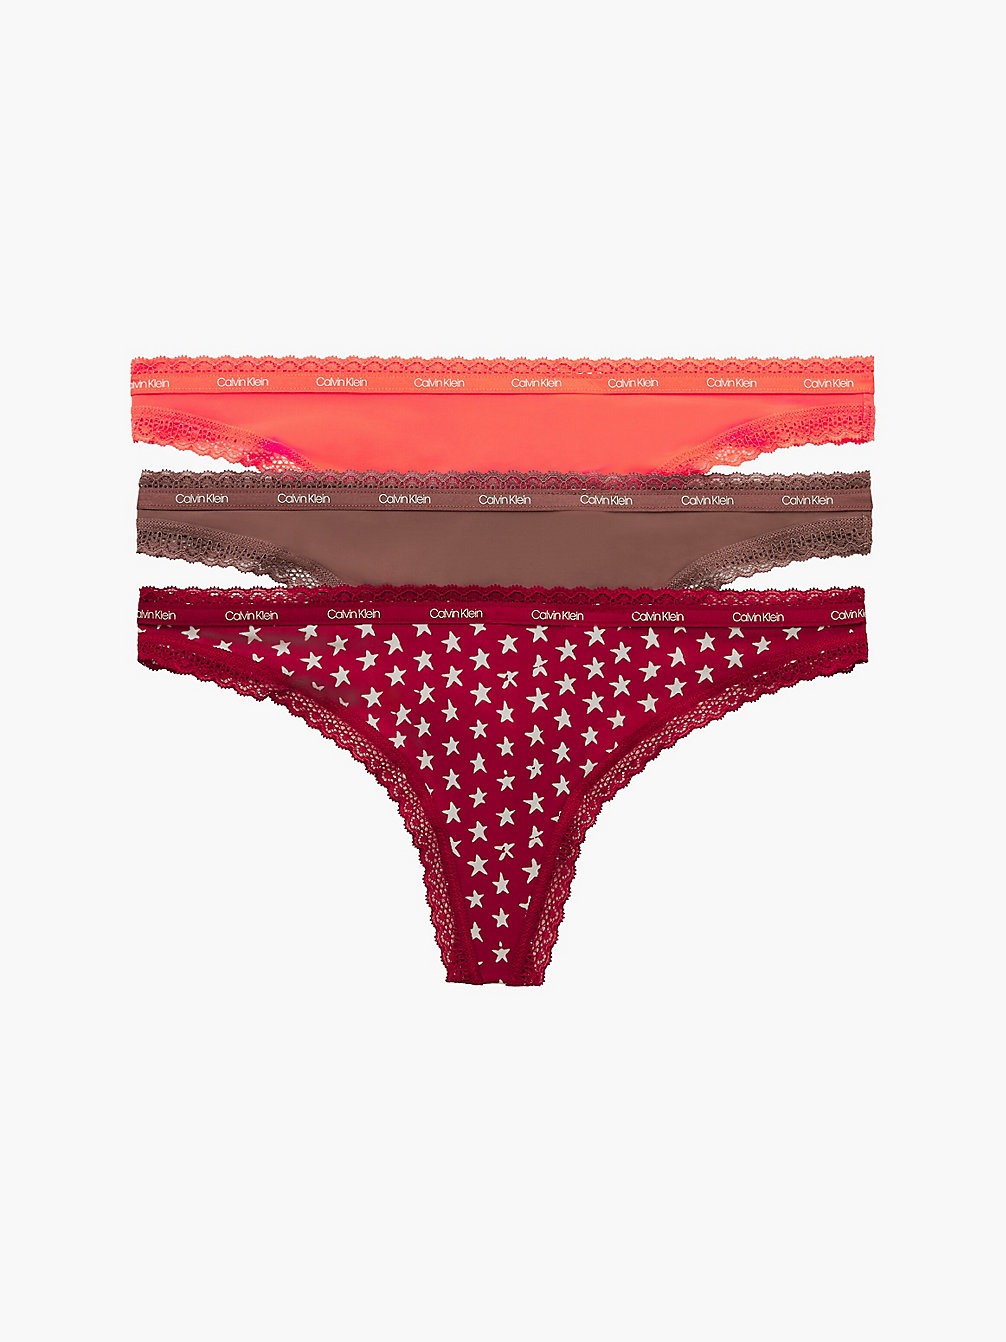 STAR STAMP_RED/BURNT EMBERS/CAMEL 3 Pack Thongs - Bottoms Up undefined women Calvin Klein